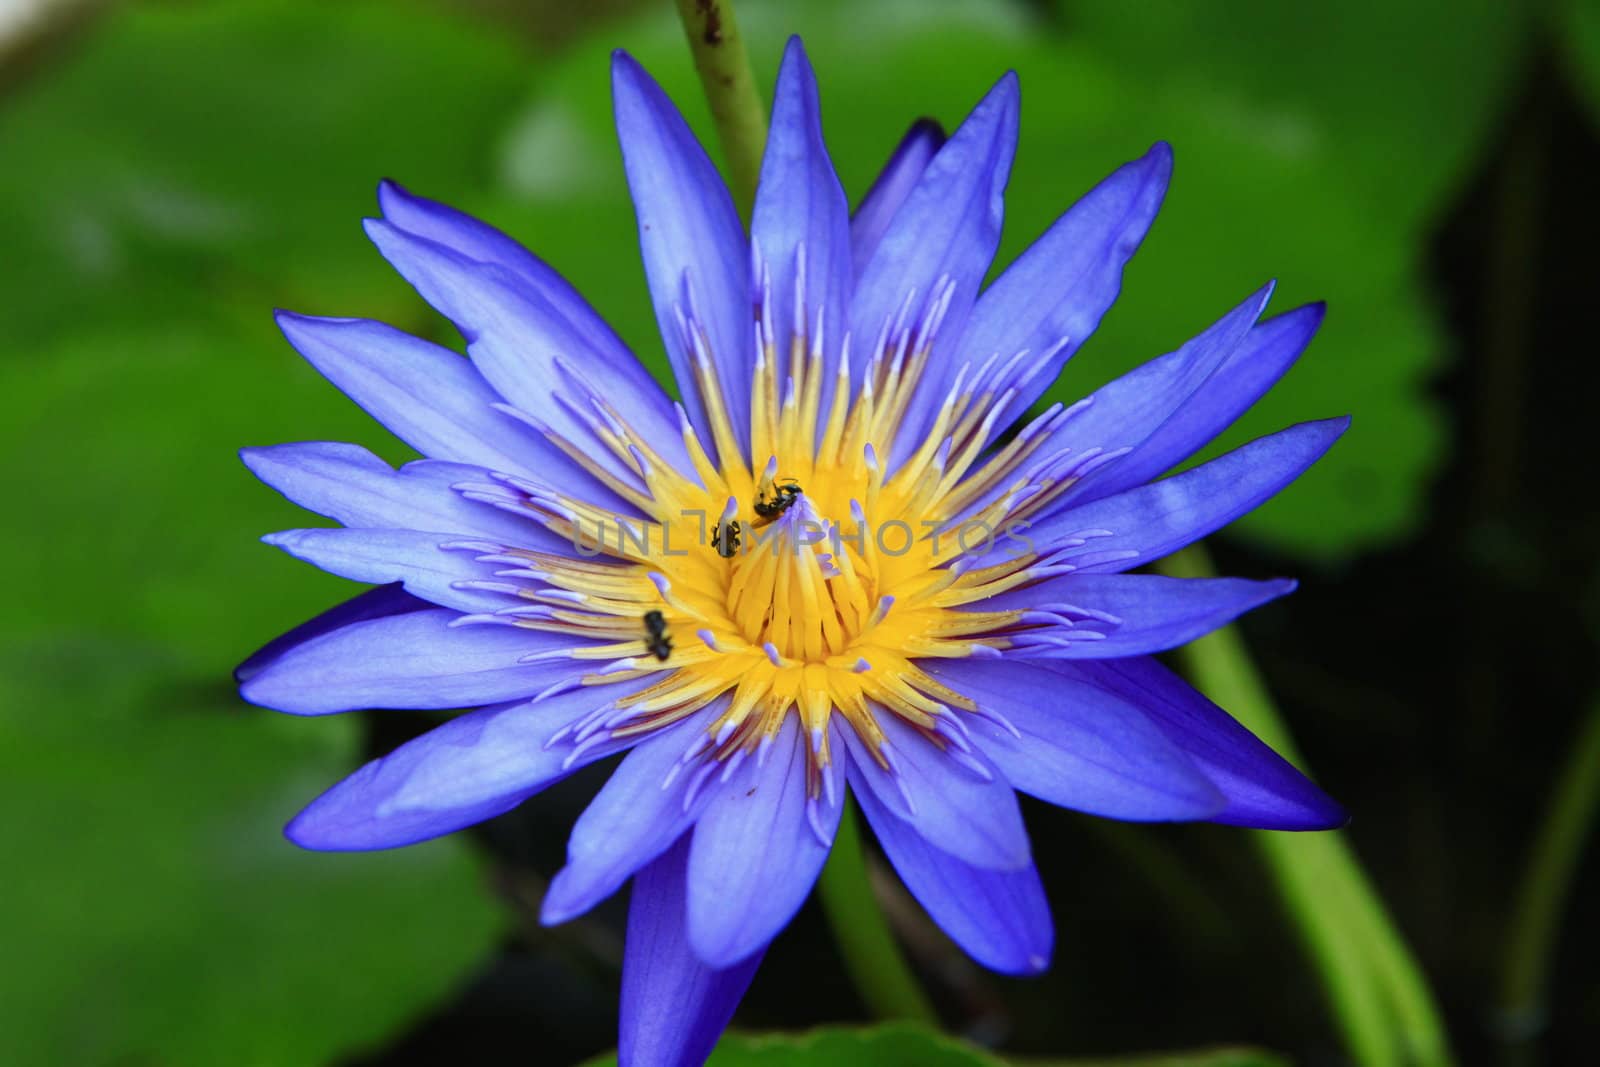 a beautiful purple lotus with the bees inside